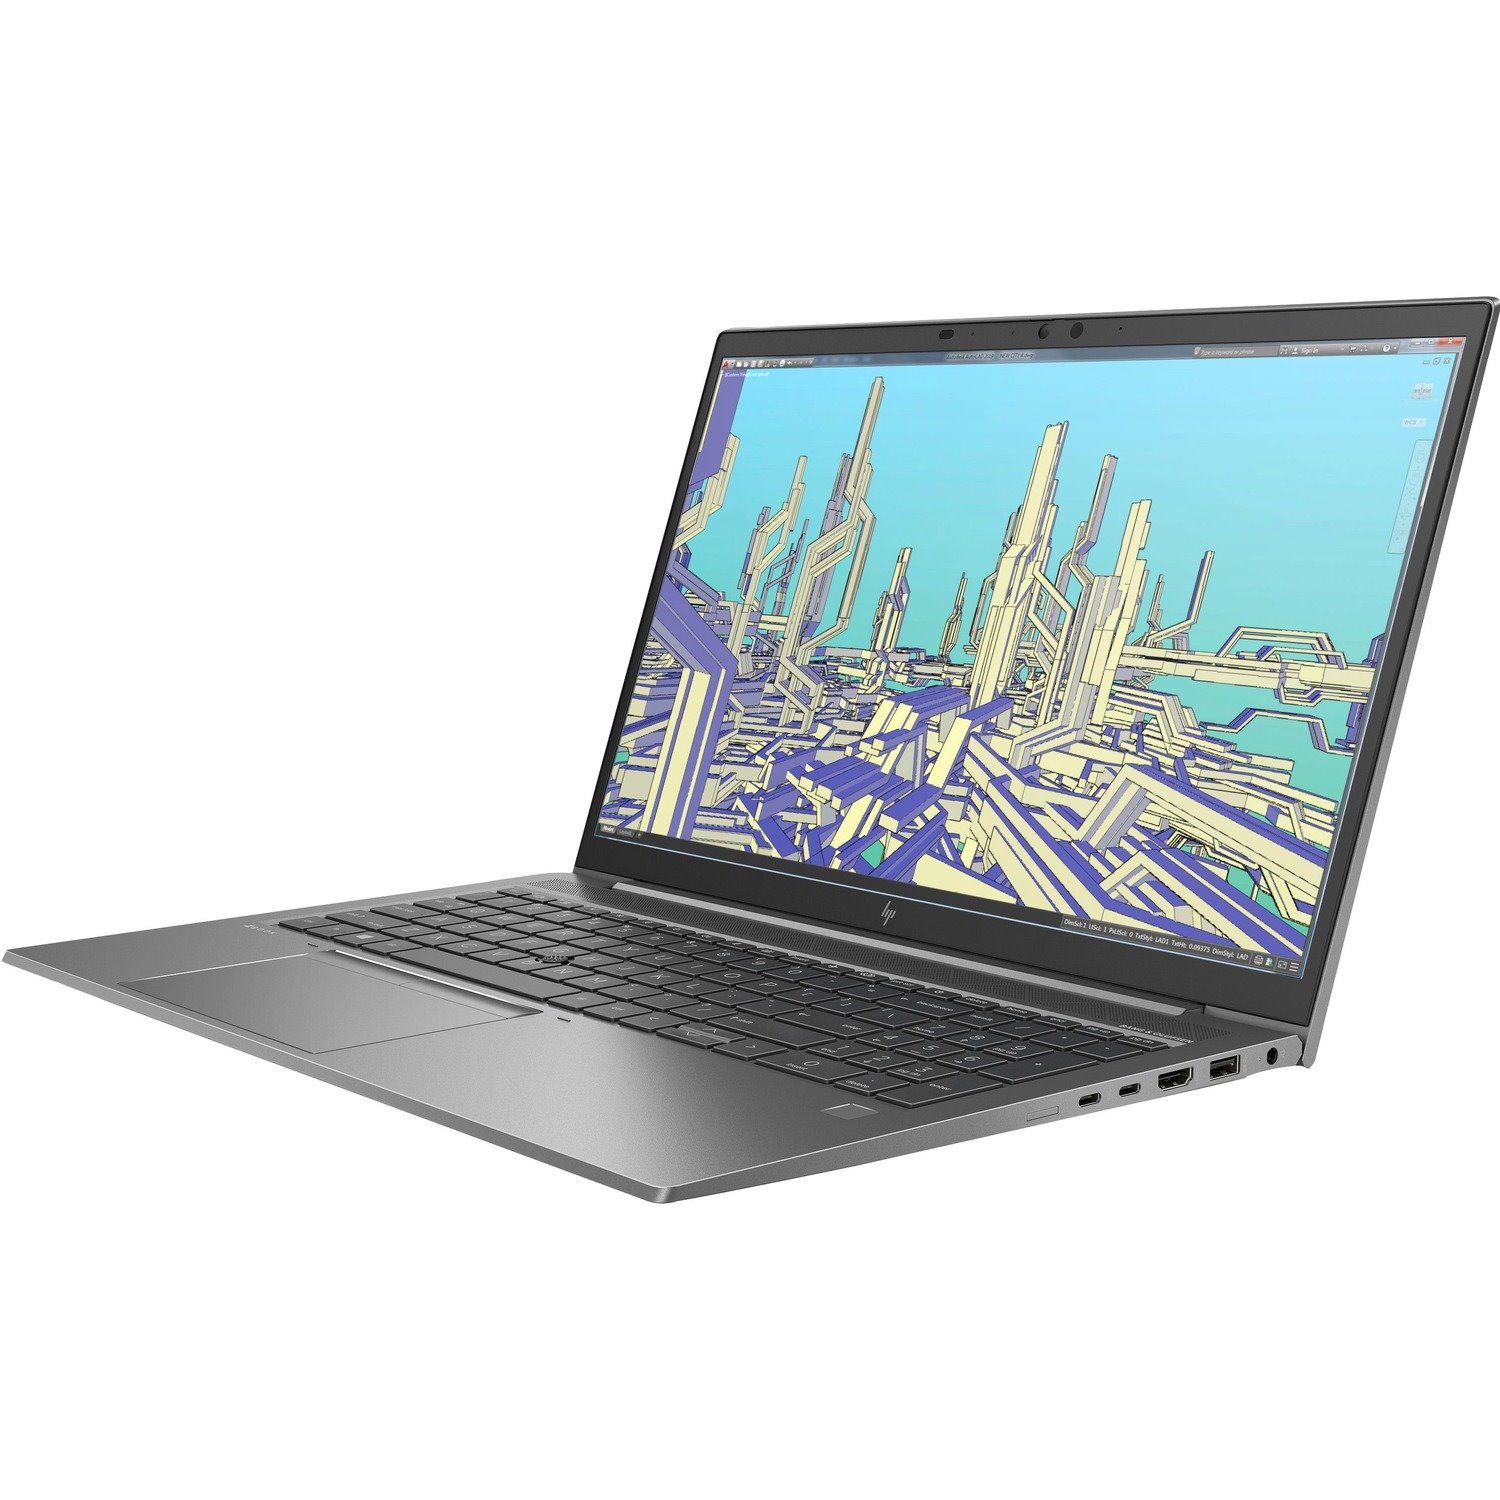 HP ZBook Firefly G8 39.6 cm (15.6") Mobile Workstation - 4K UHD - 3840 x 2160 - Intel Core i7 11th Gen i7-1185G7 Quad-core (4 Core) 4.80 GHz - 32 GB Total RAM - 1 TB SSD